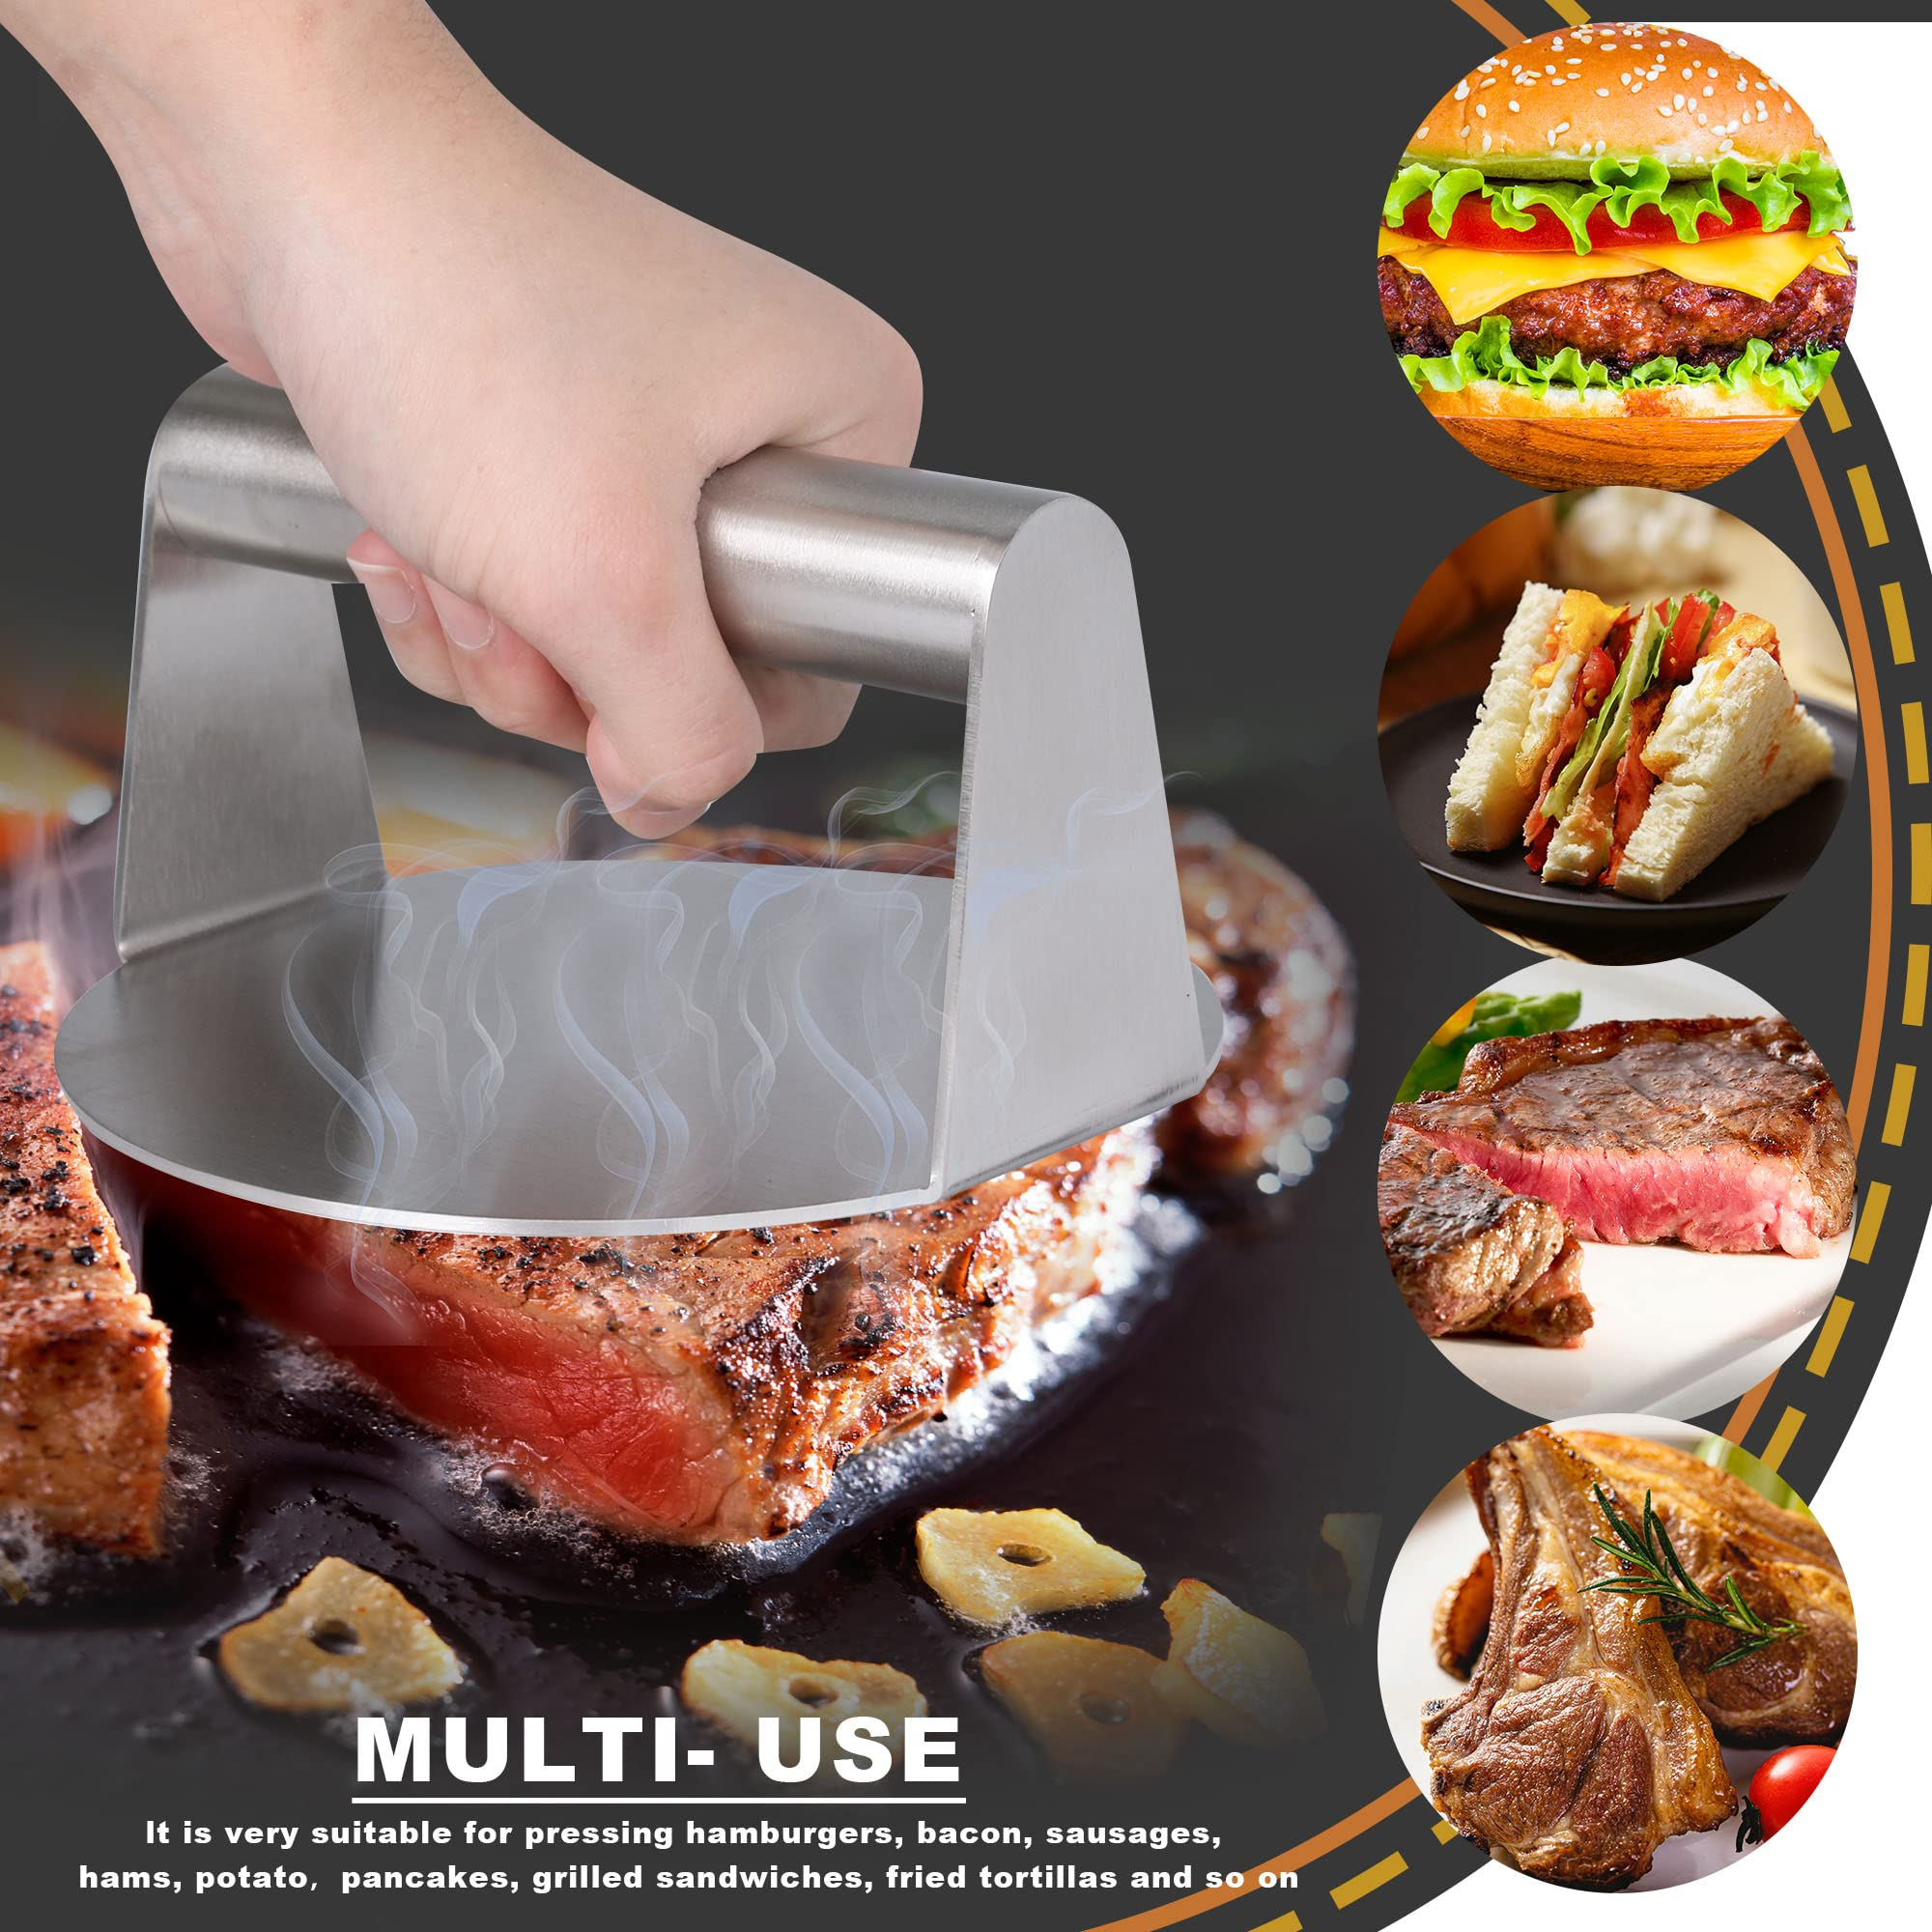 Stainless Burger Press Meat Smasher Hamburger Steak No-Rust for Griddle BBQ